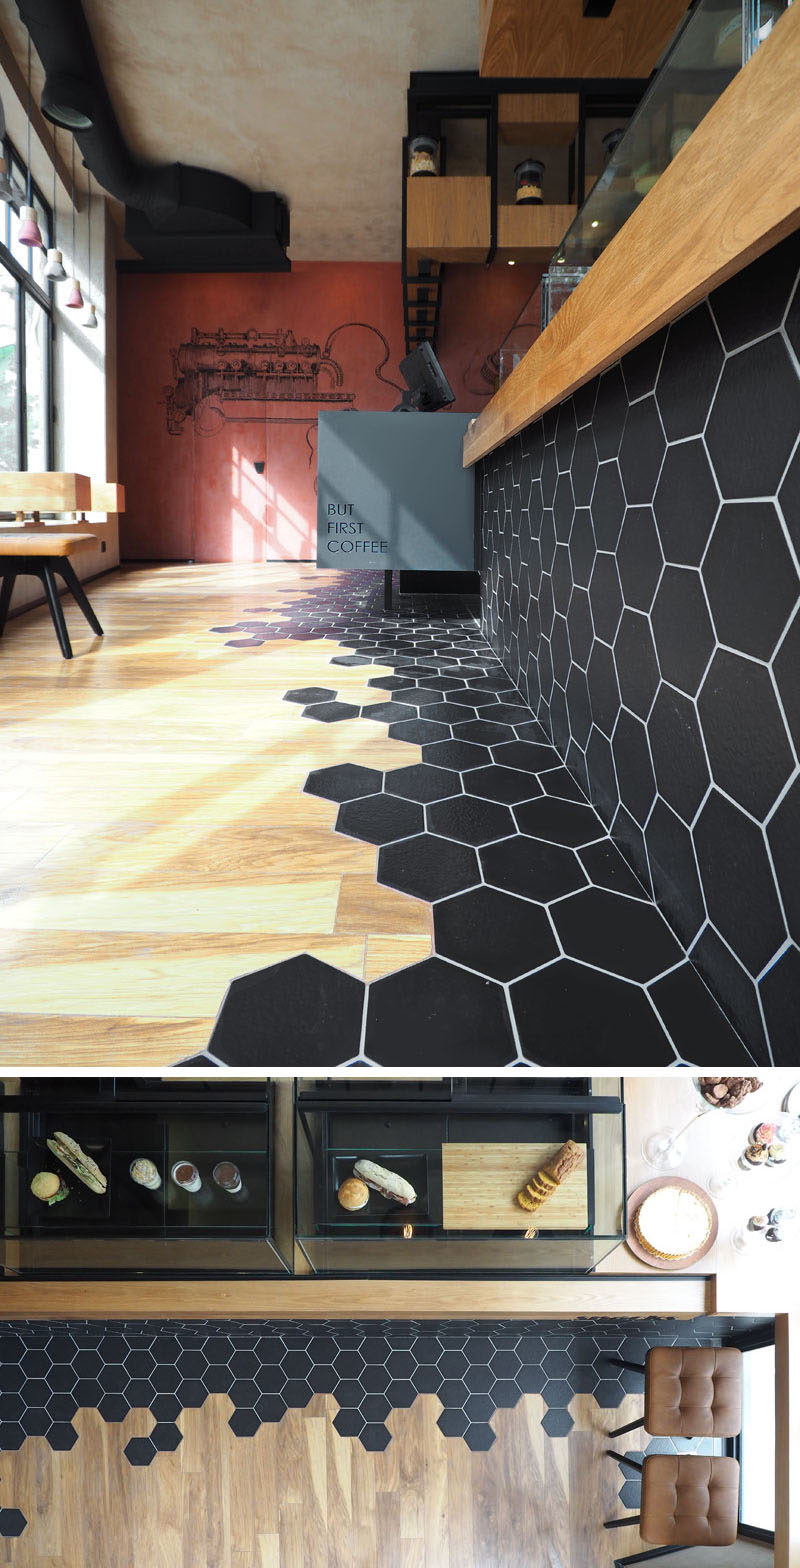 Hexagon Tiles Transition Into Wood Flooring Inside This Cafe In Greece